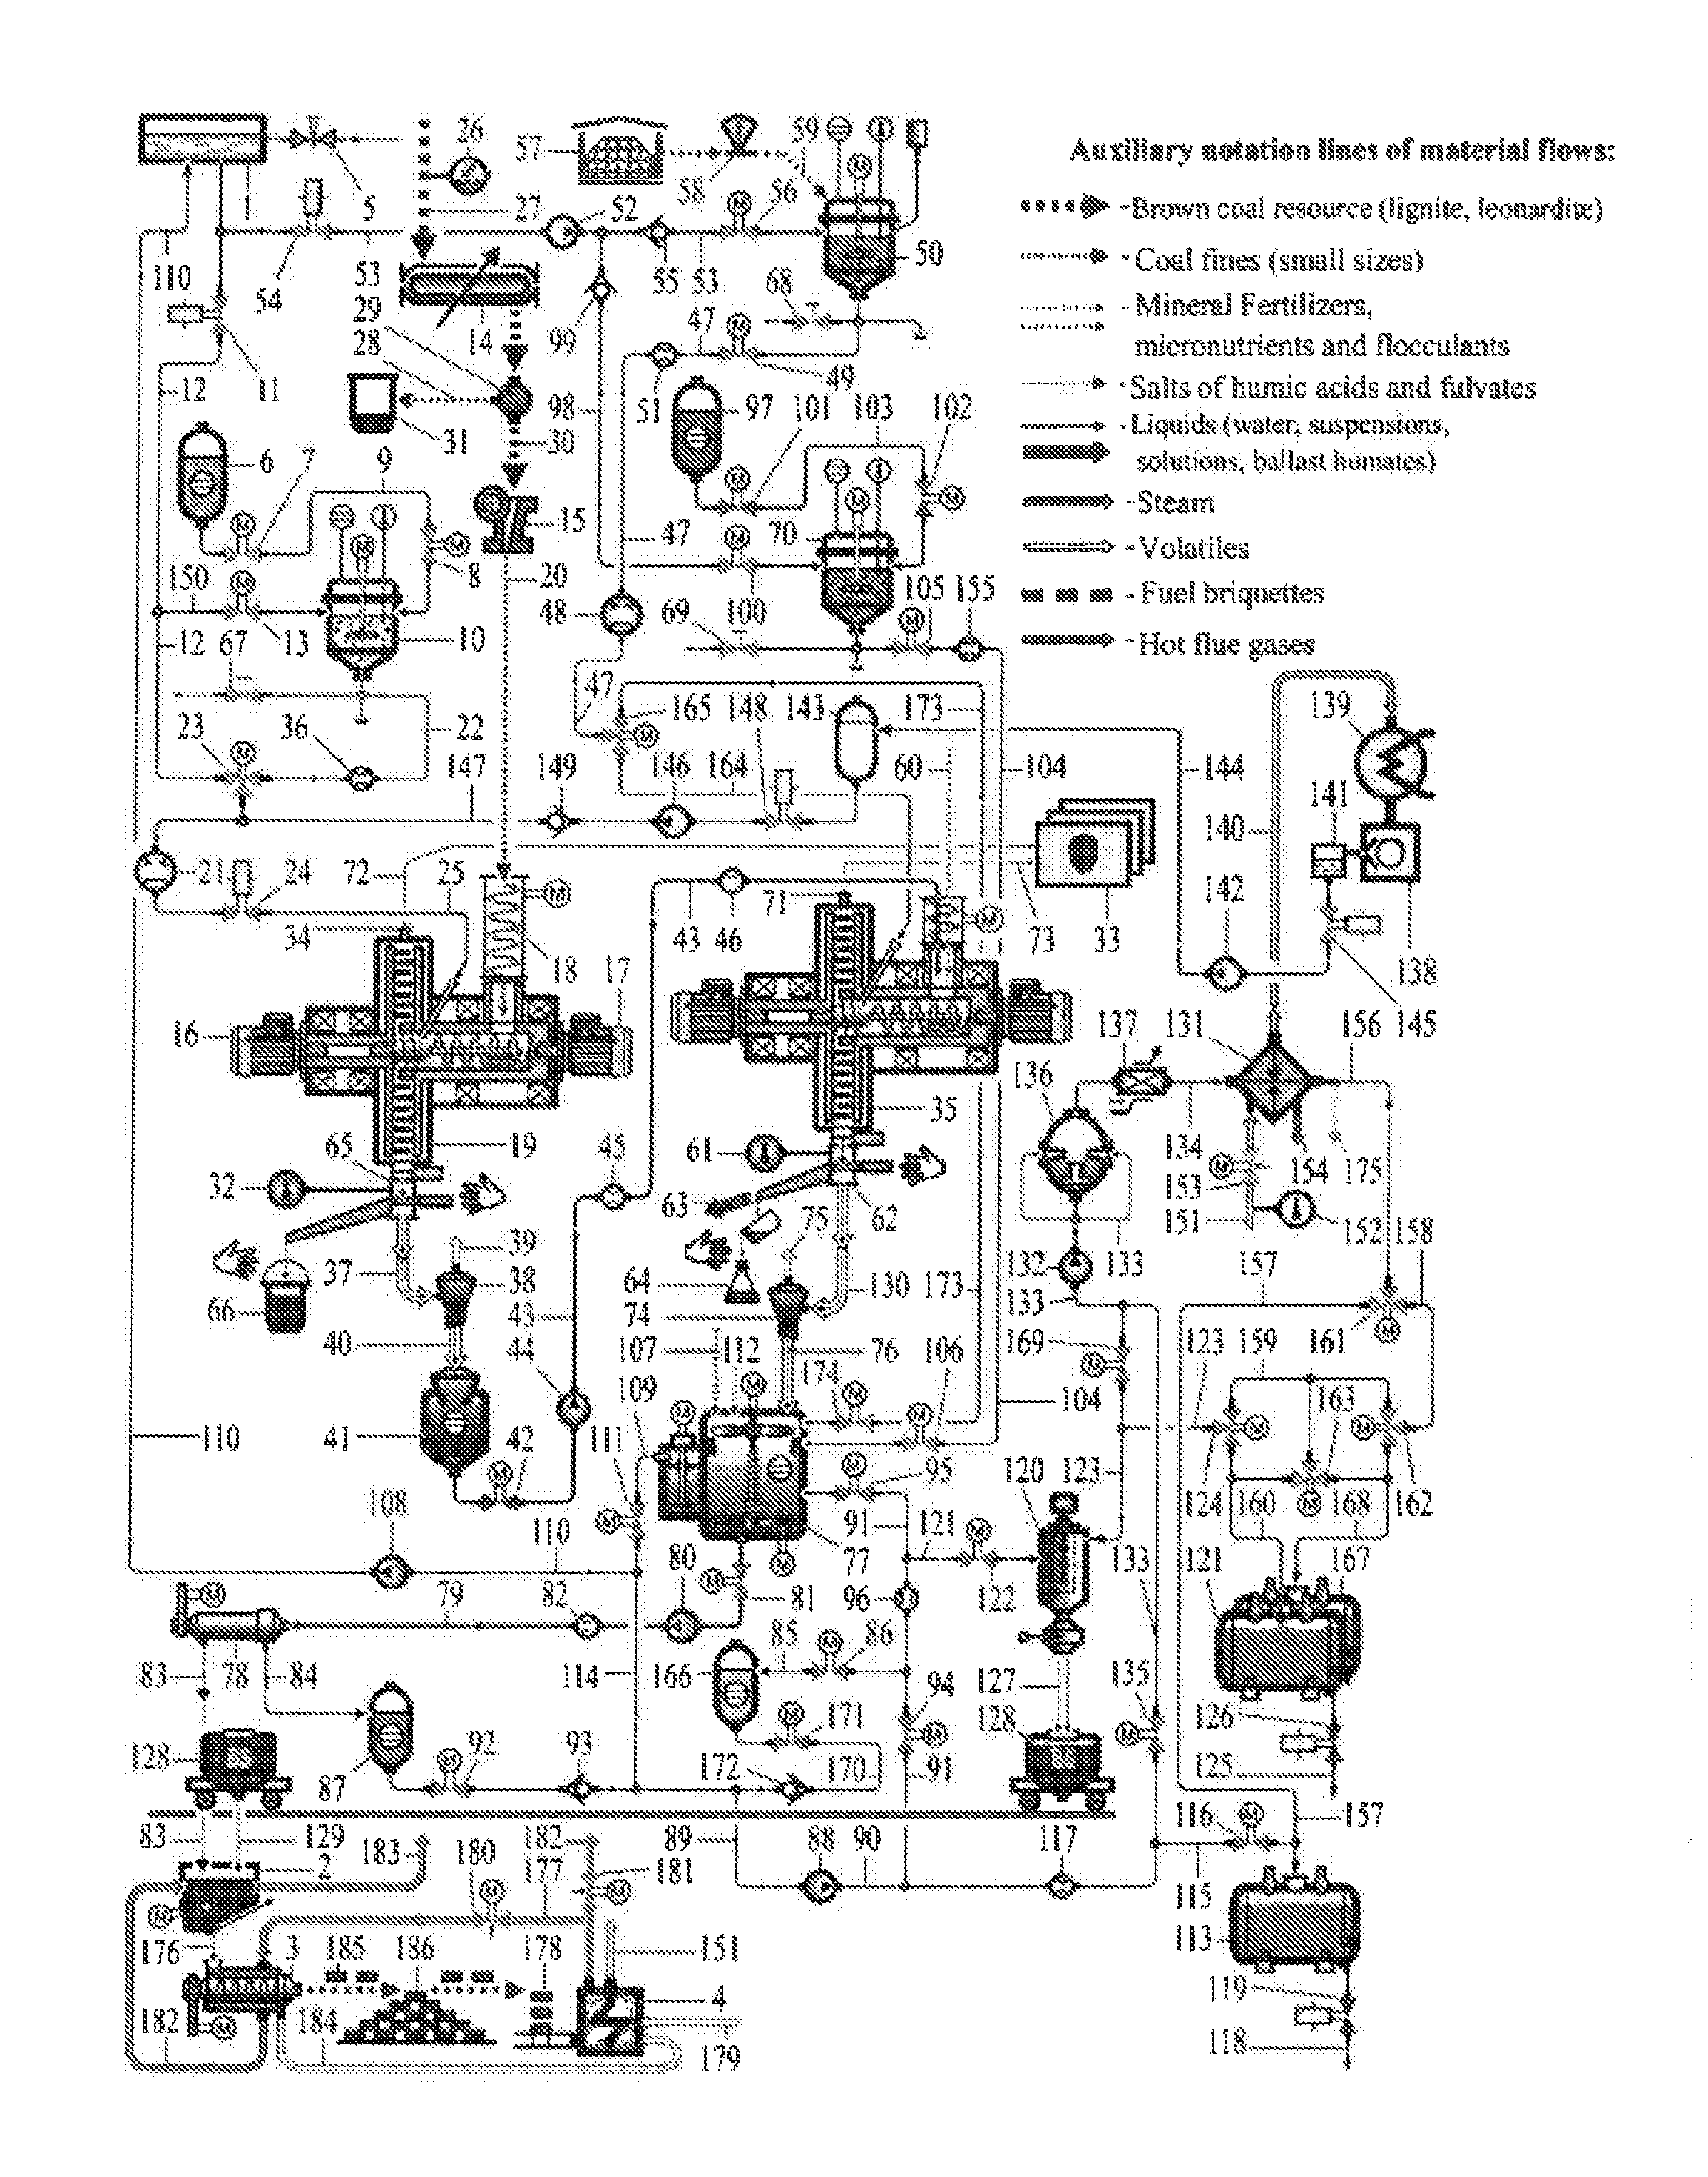 Method for comprehensively processing brown coal and leonardite into humic fertilizers and preparations and into fuel briquettes, and mechanochemical reactor for processing highly-viscous media